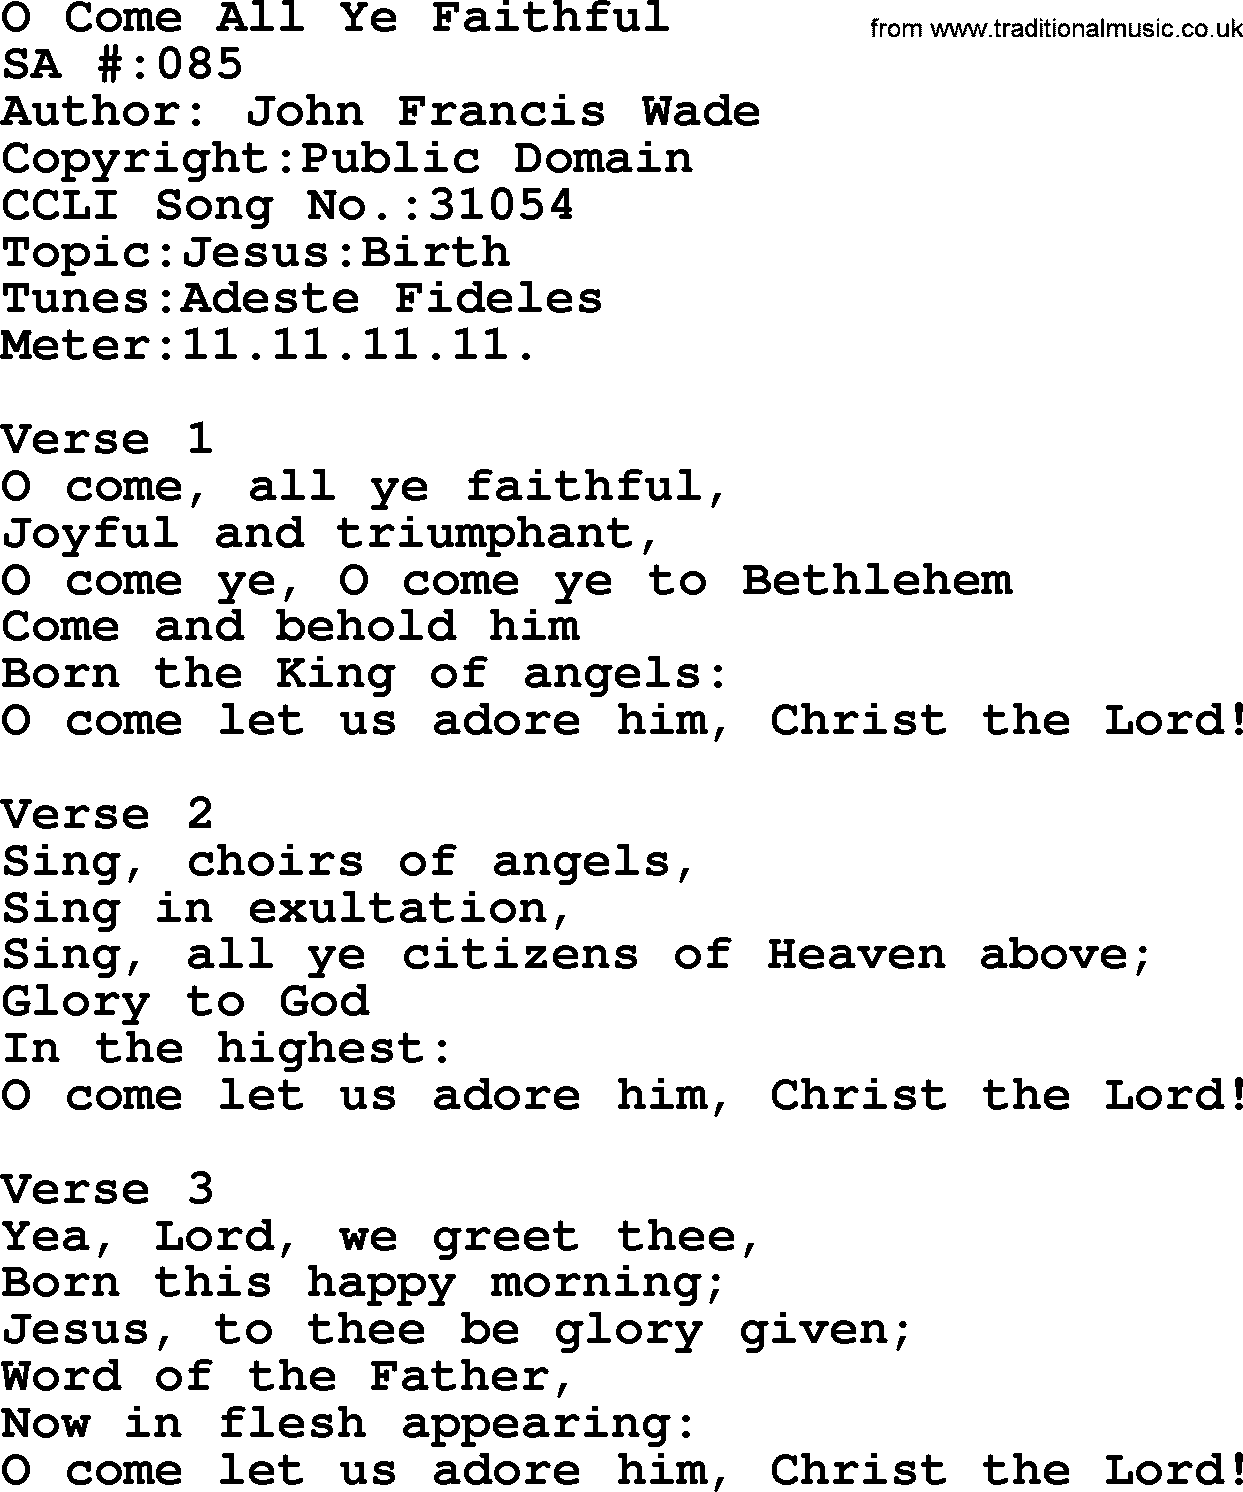 Salvation Army Hymnal, title: O Come All Ye Faithful, with lyrics and PDF,